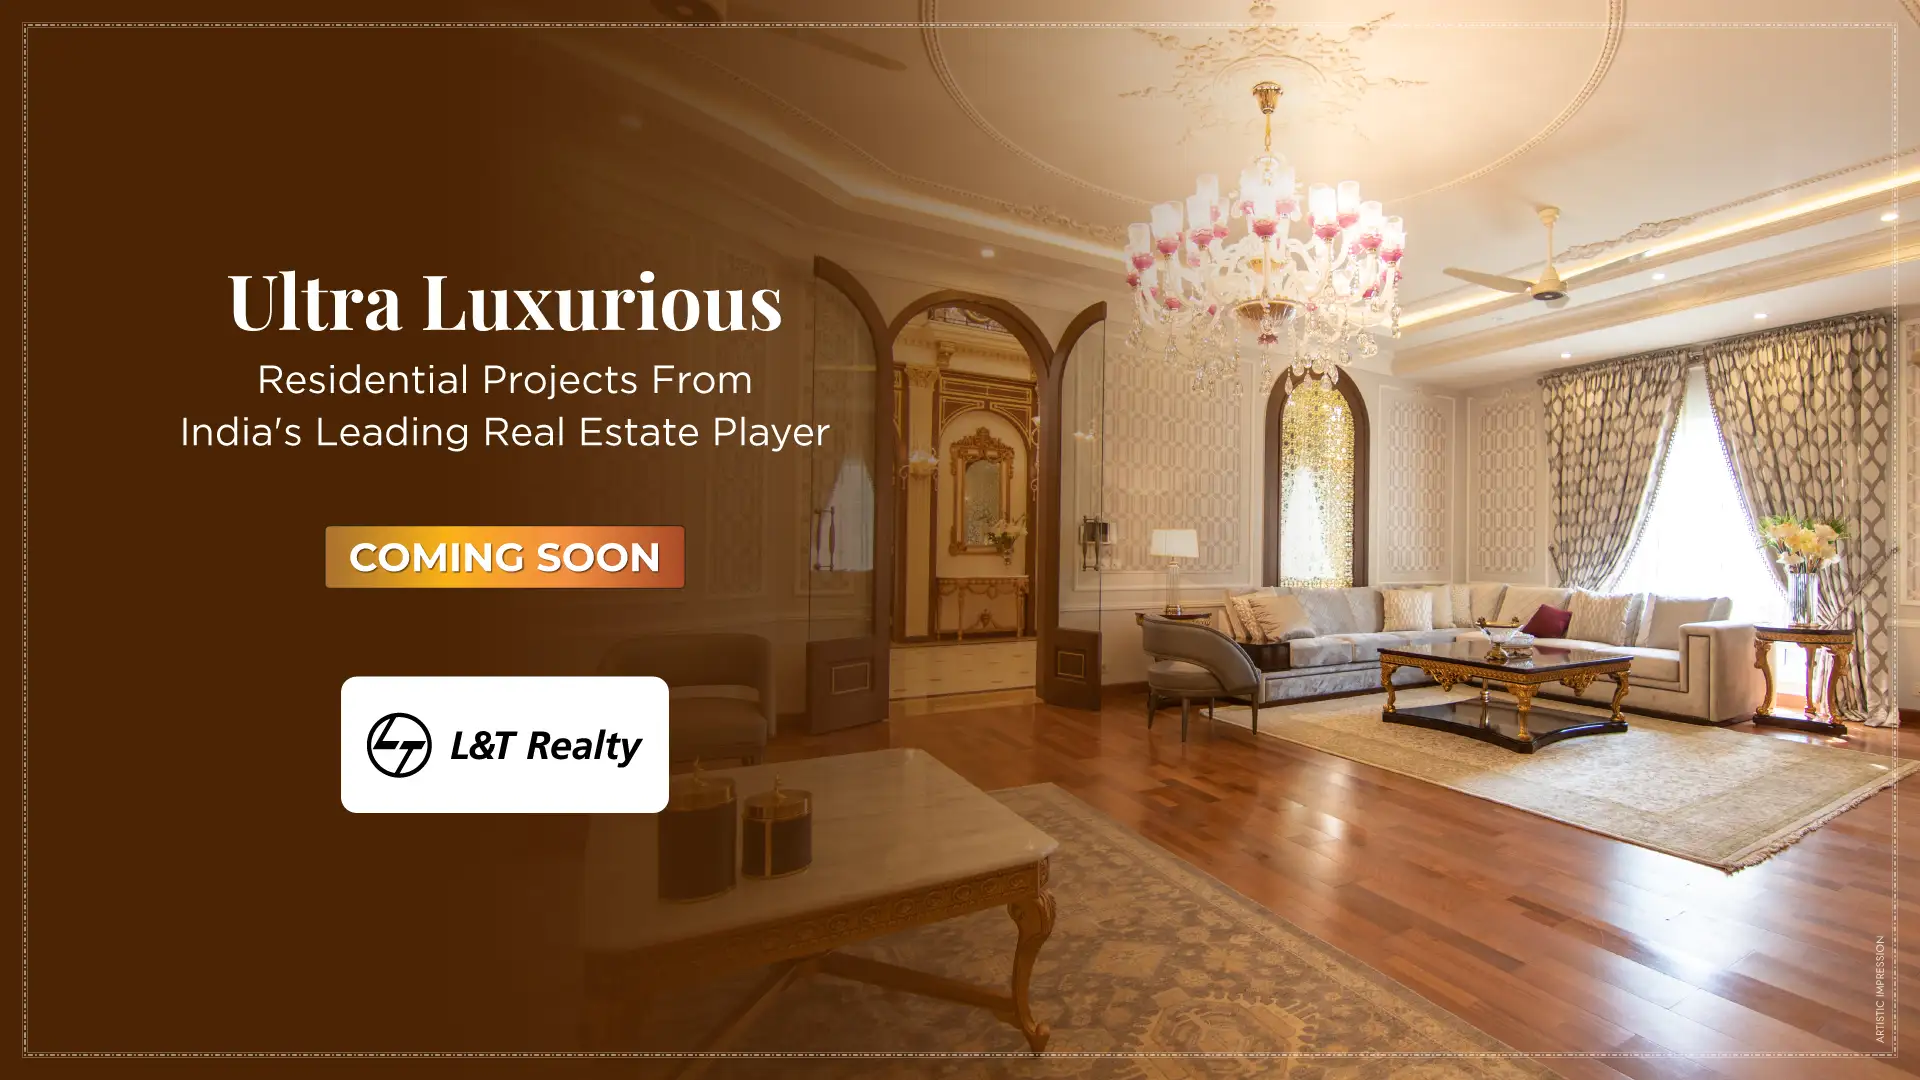 Luxurious Residential Projects